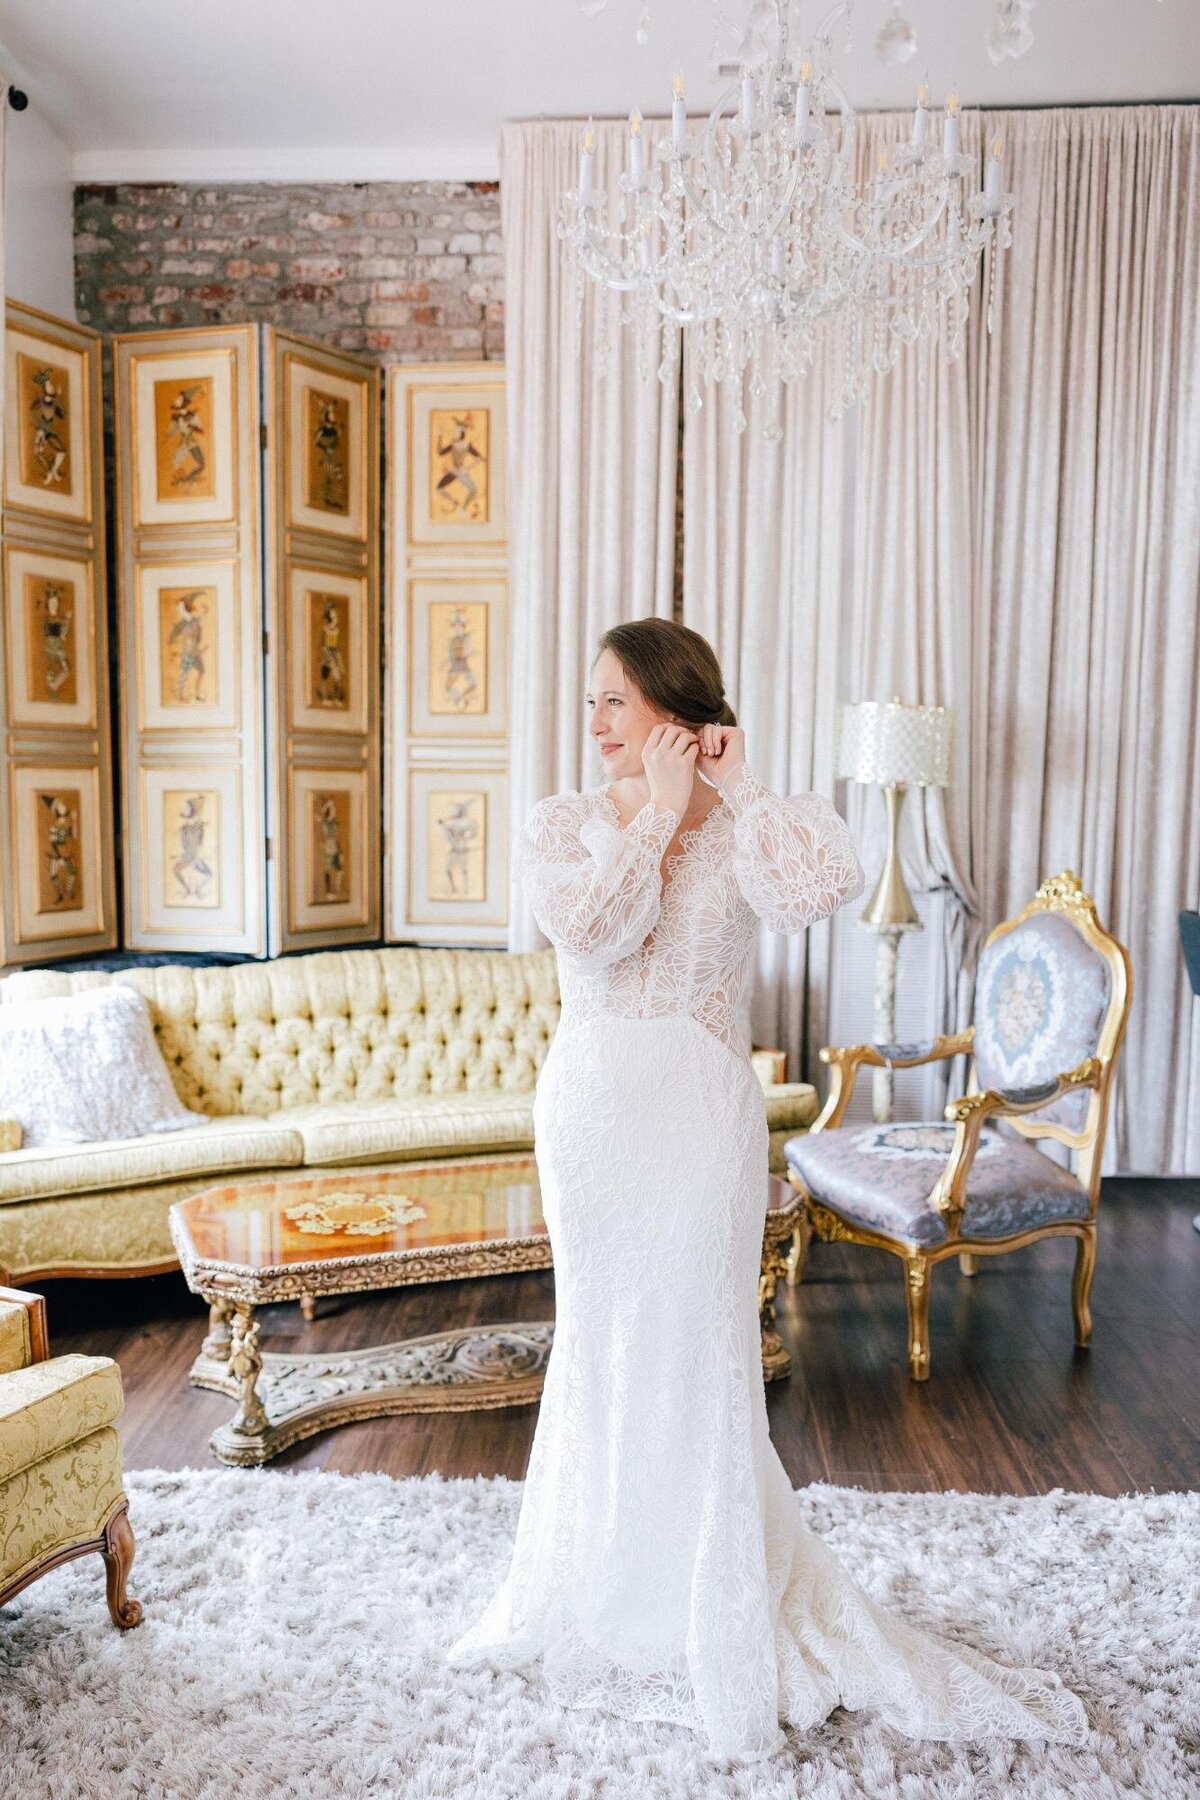 A woman in an elegant white lace dress standing in a luxurious room with vintage furniture and decor.